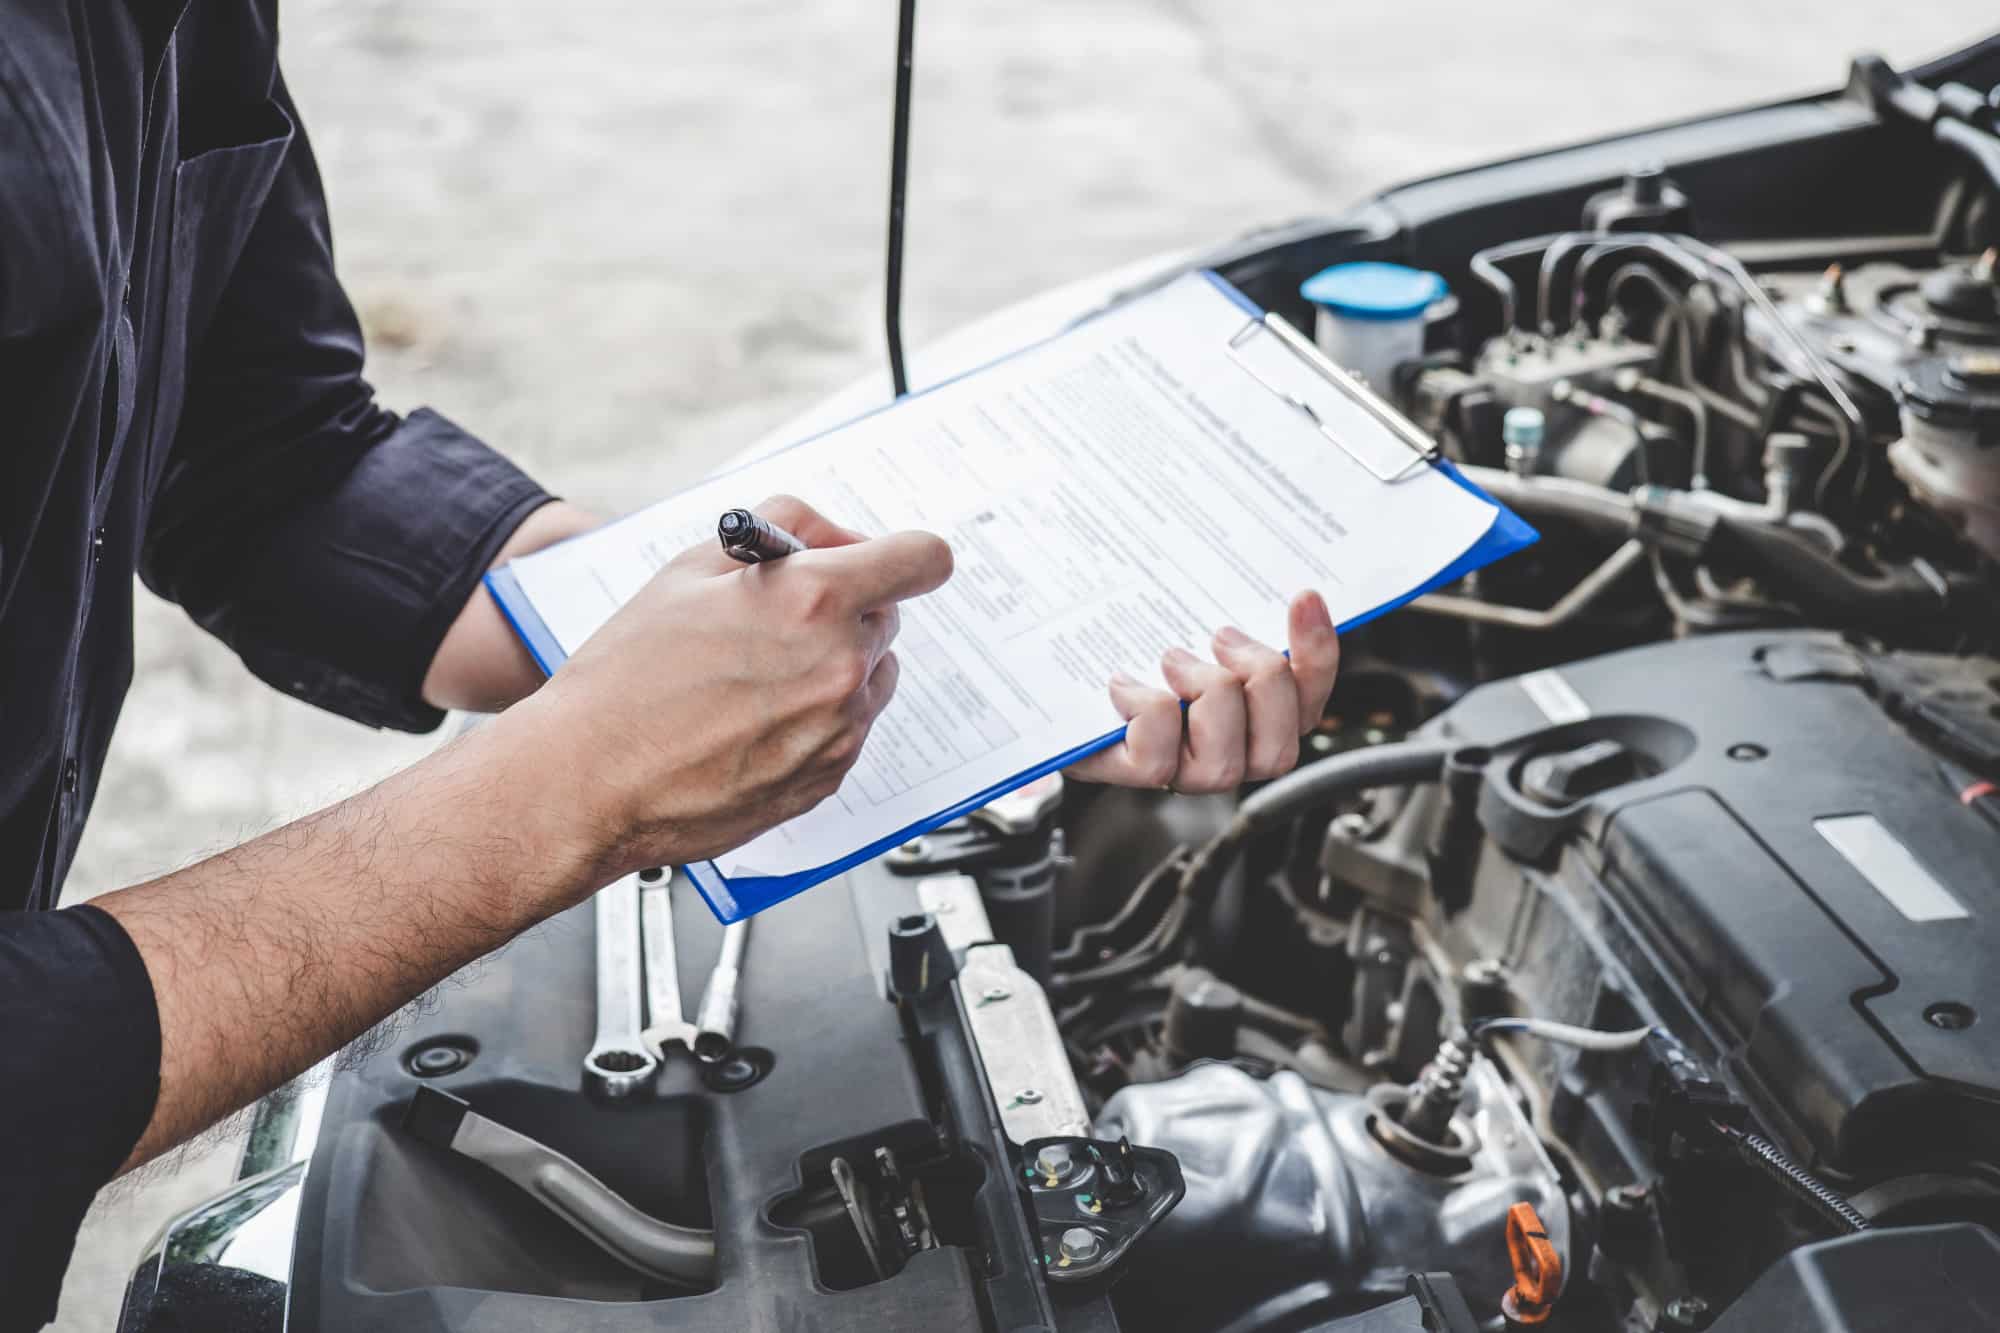 6 Common Car Repair Mistakes and How to Avoid Them